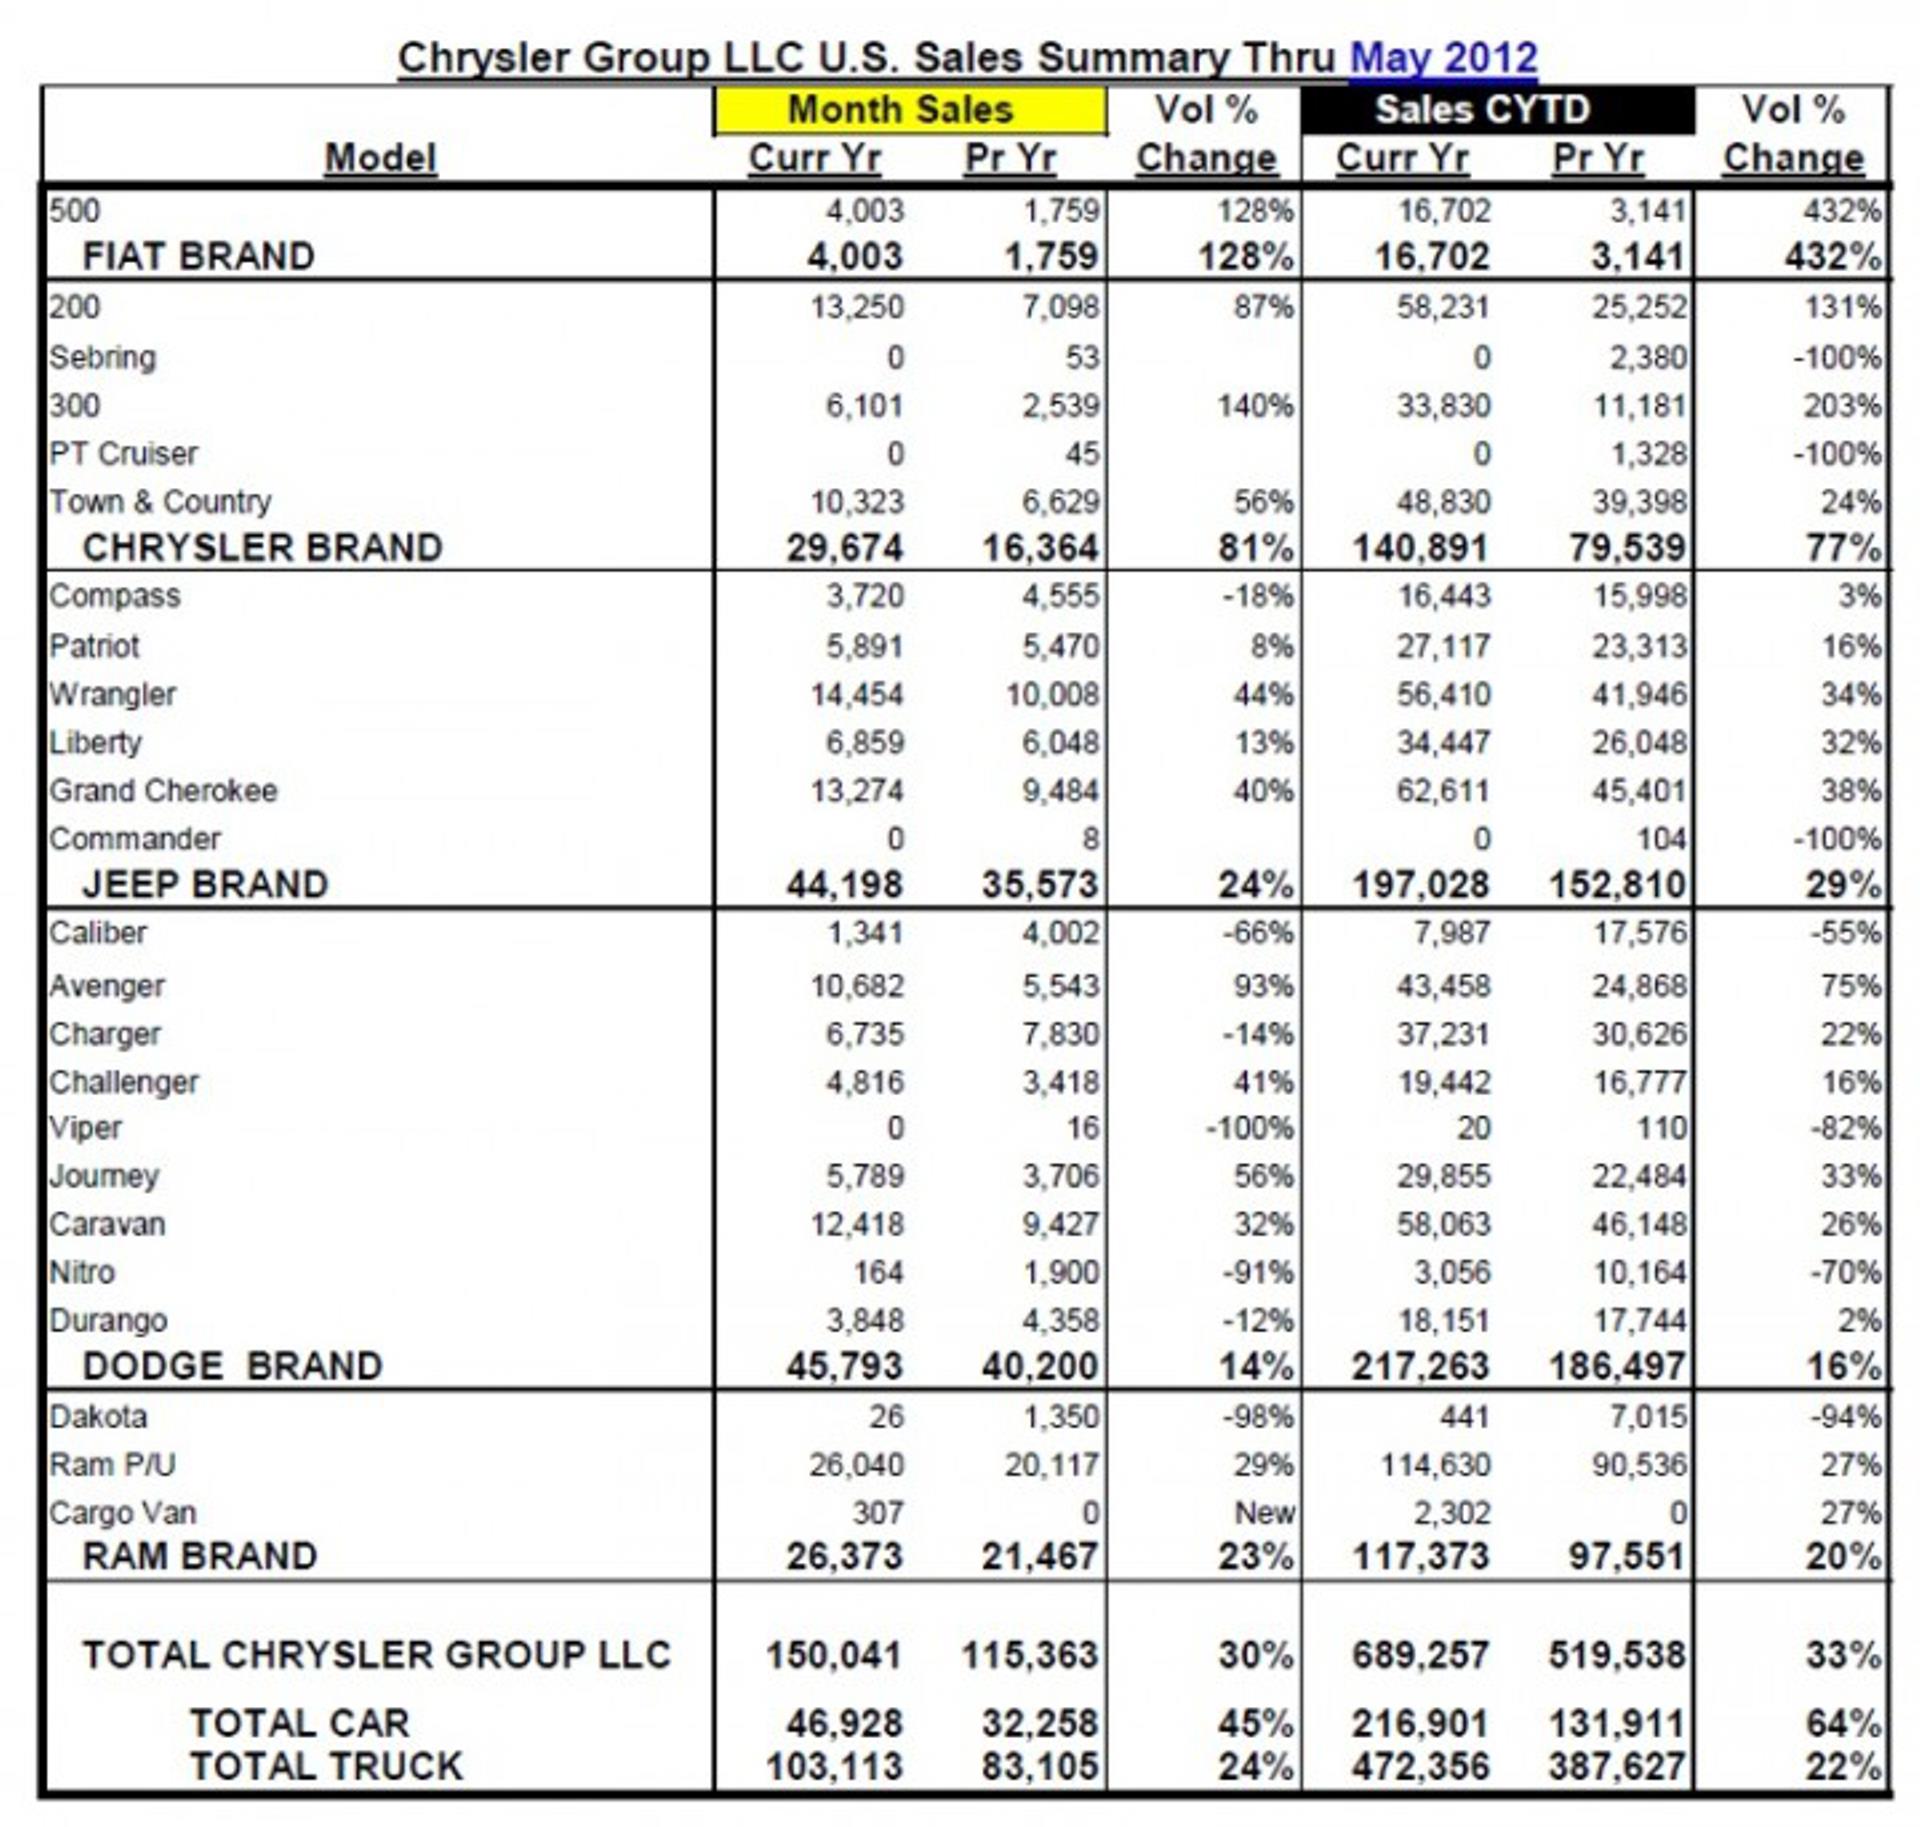 Chrysler Group LLC Reports May 2012 U.S. Sales Increased 30 Percent; Best May Sales in Five Years